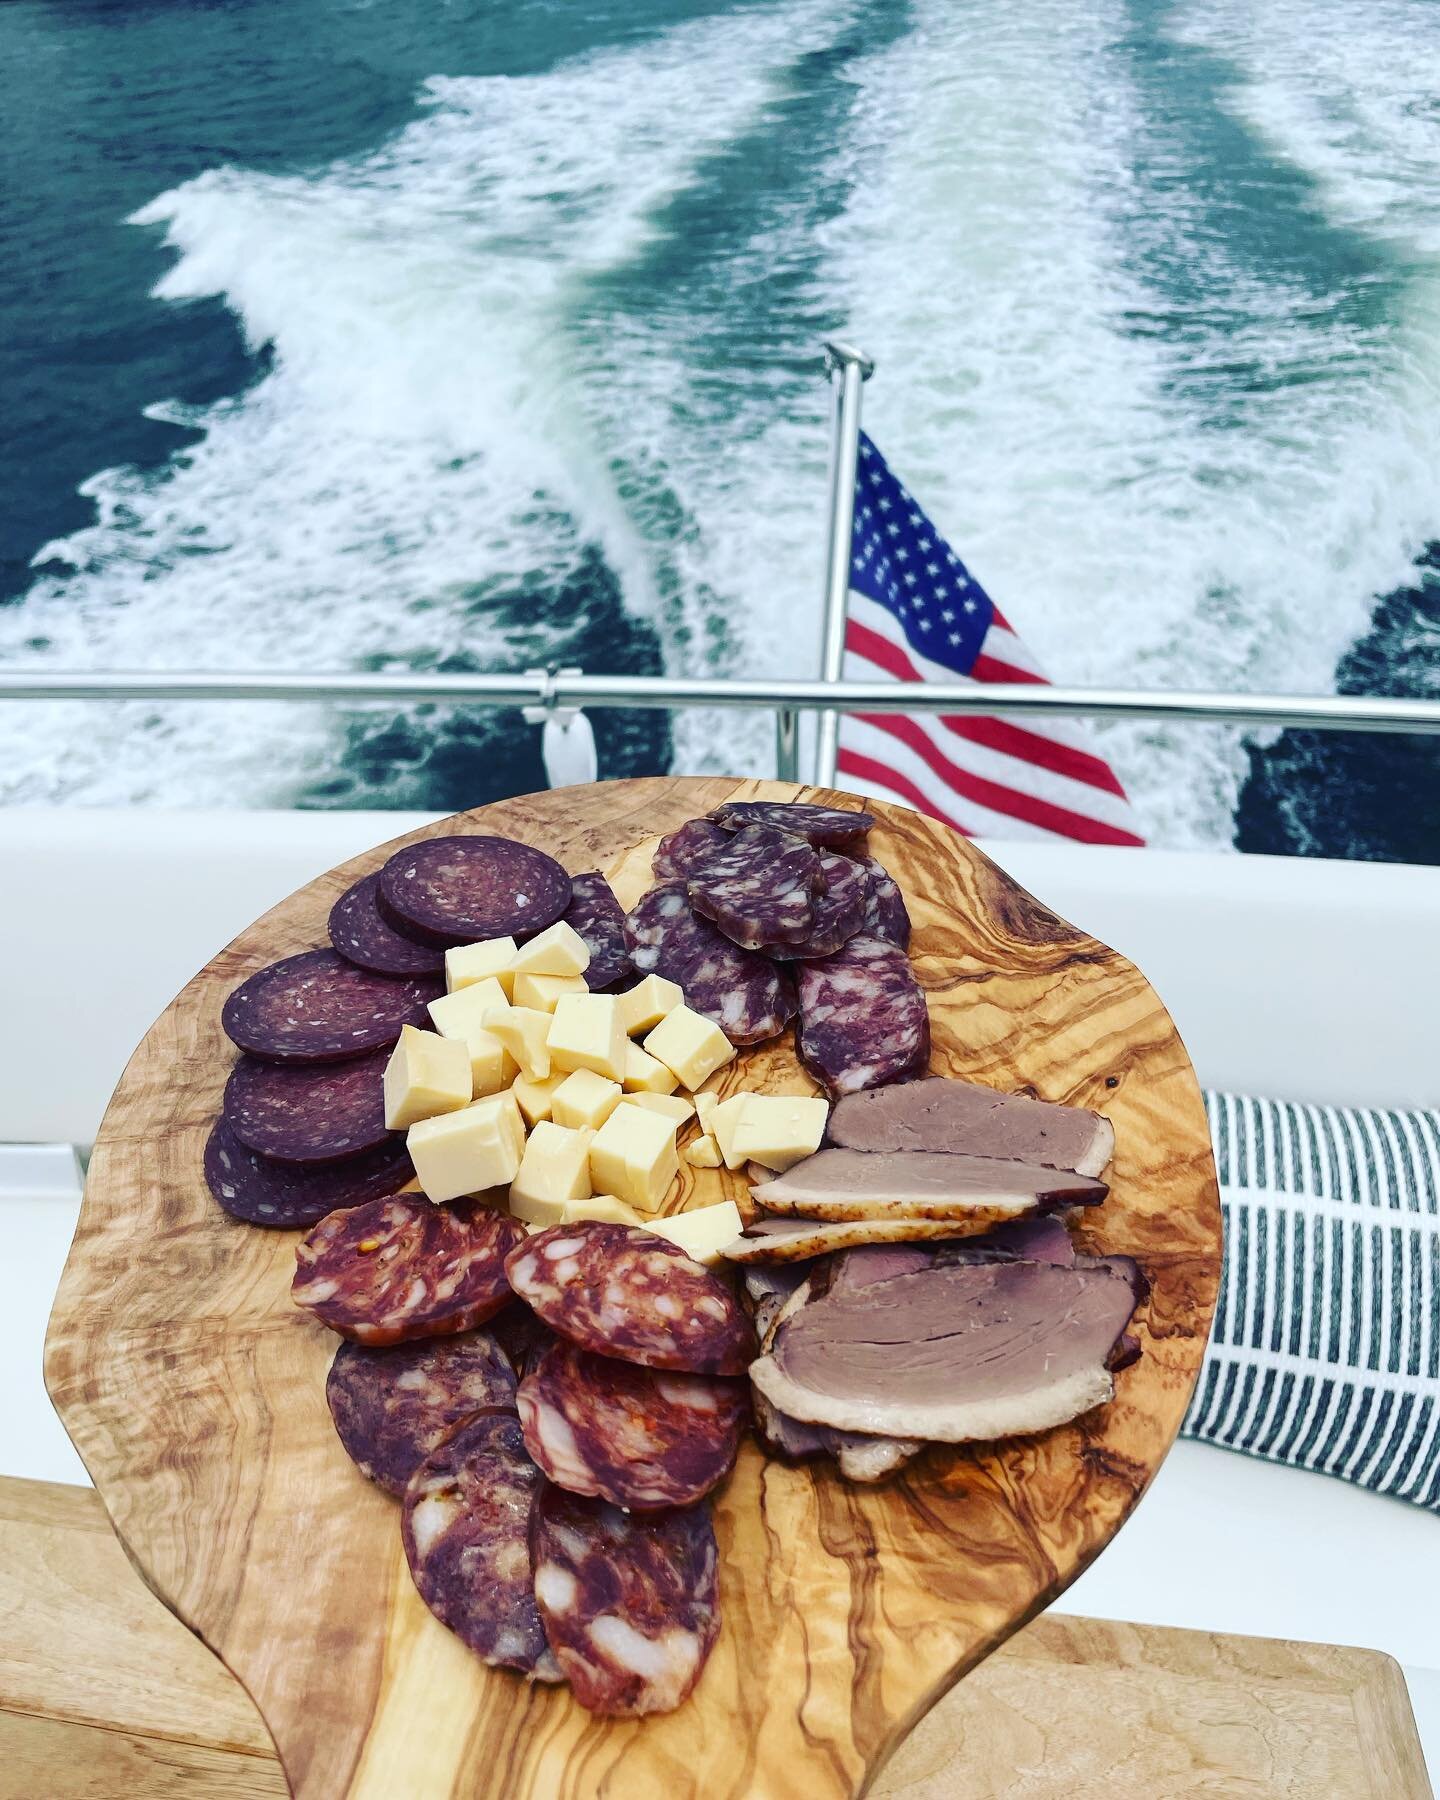 @larchmont.charcuterie is on the 7 seas! ⛴🌊! #larchmont #larchmontcharcuterie #saucisson #saucissonsec #boat #boatlife #boating #smokedduck #cheese #charcuterie #charcuterieboard